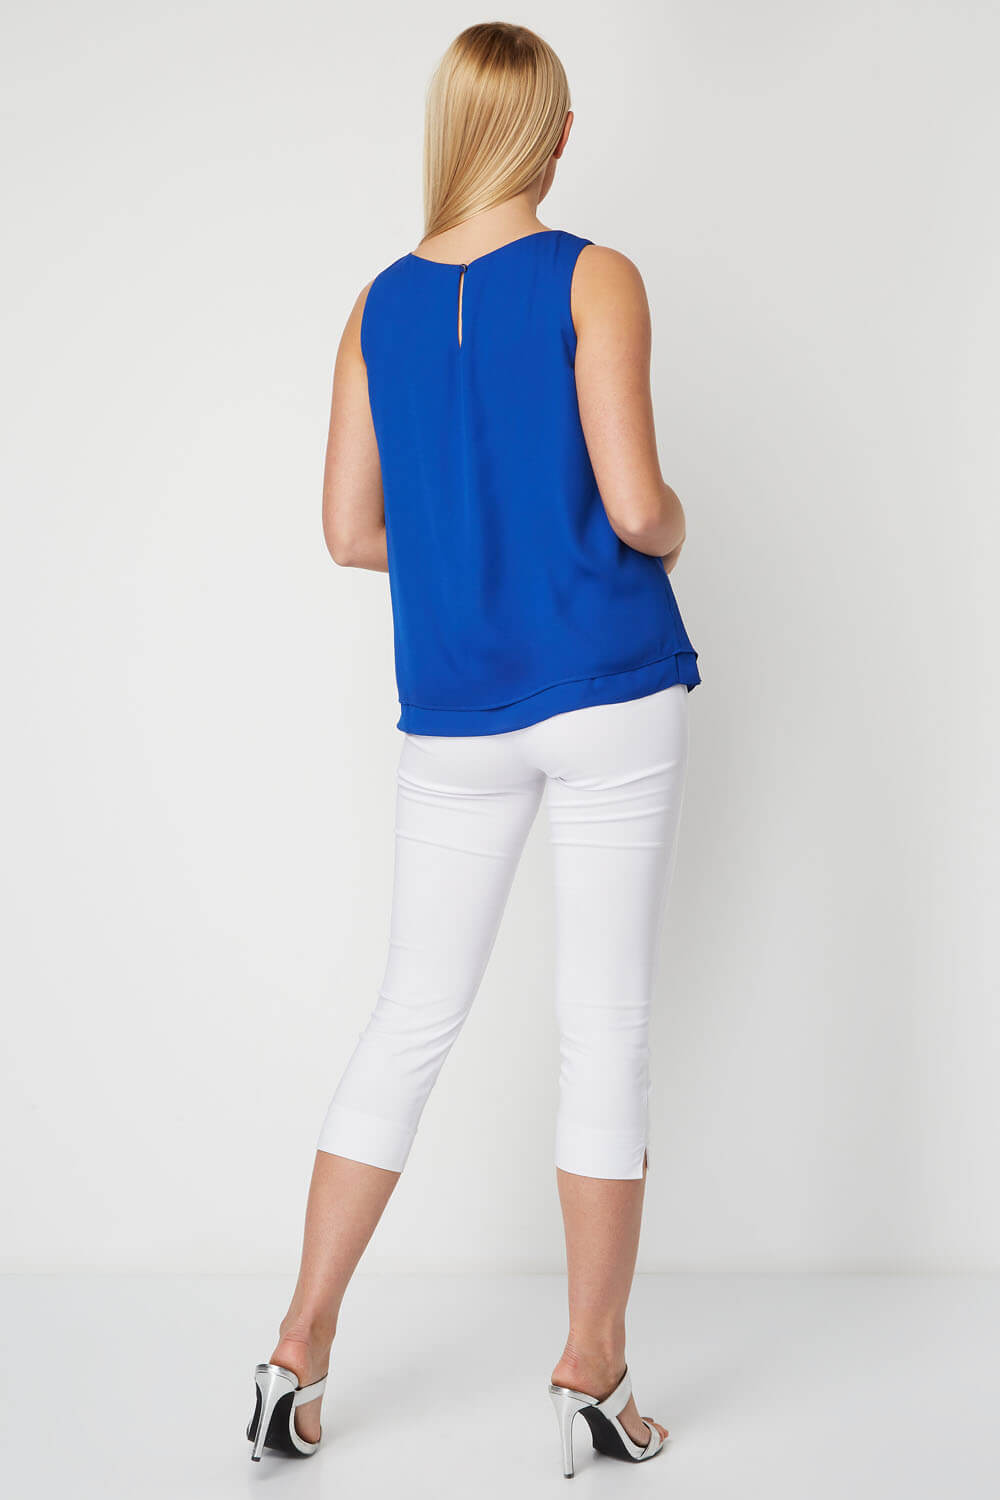 Royal Blue Double Layer Chiffon Top, Image 3 of 8